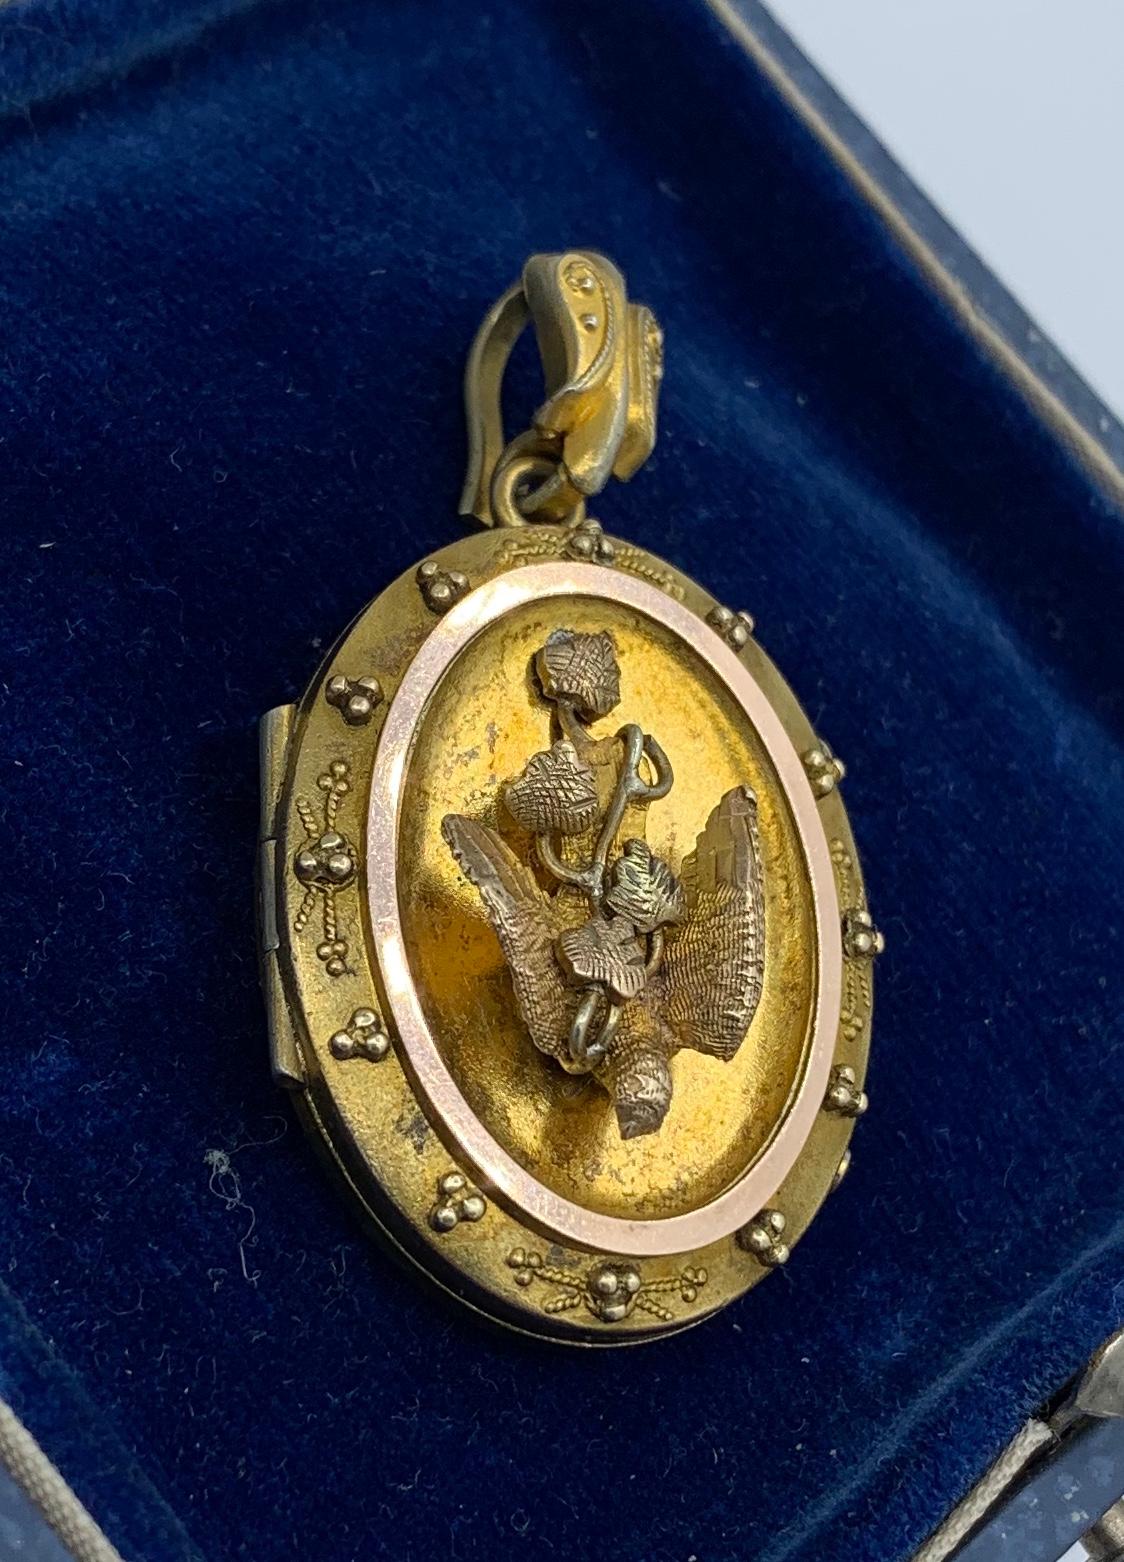 This is a magnificent Victorian - Belle Epoque Picture Locket Pendant with a stunning fully modeled three dimensional dove swallow bird on the front.  The locket has gorgeous Etruscan Revival granulation adornment around the bird who carries a